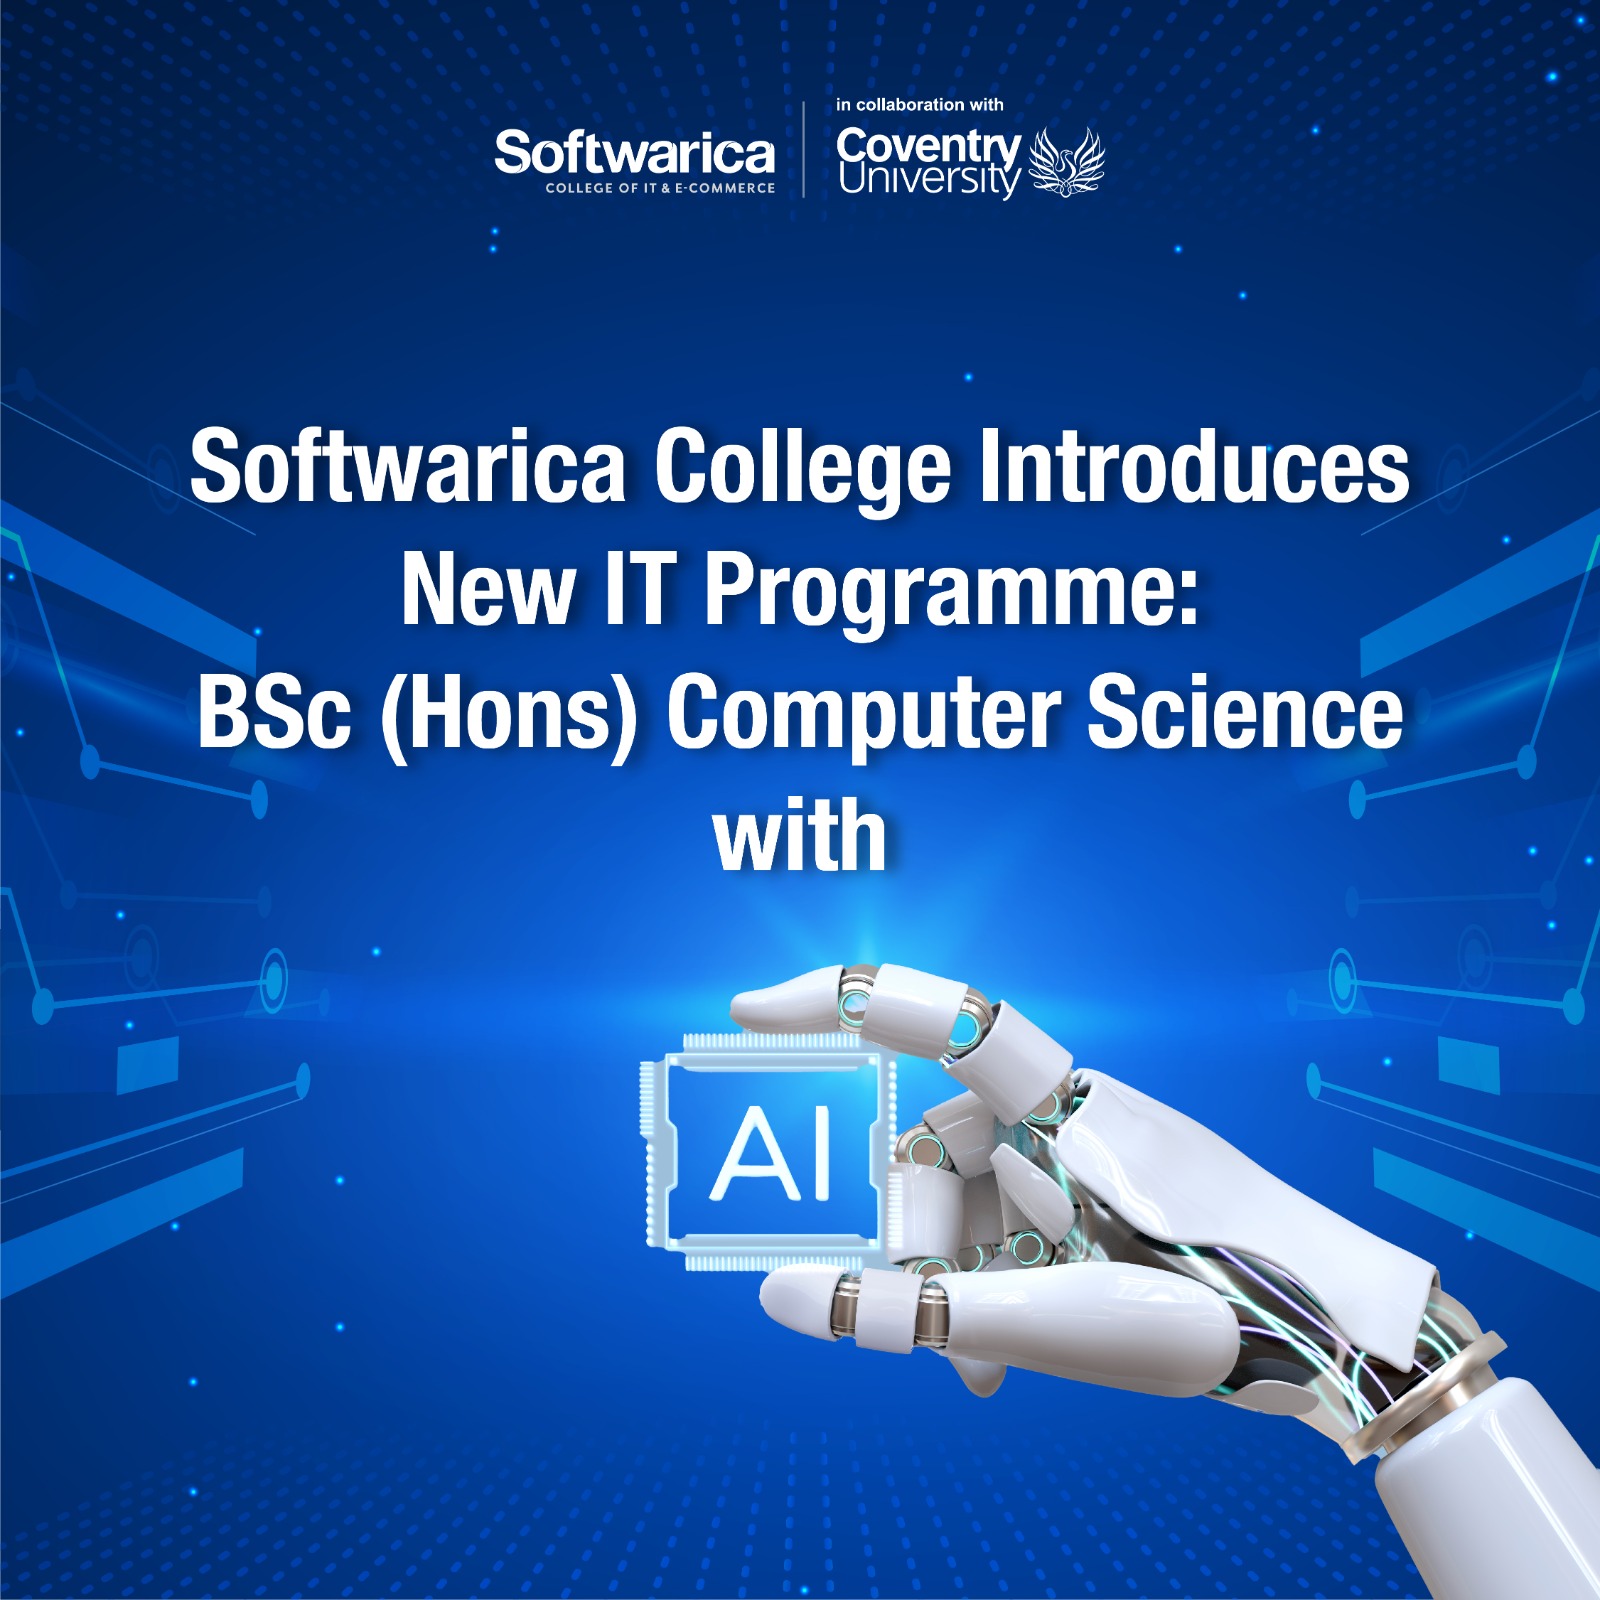 Softwarica College introduces new IT programme: BSc (Hons) computer science with AI